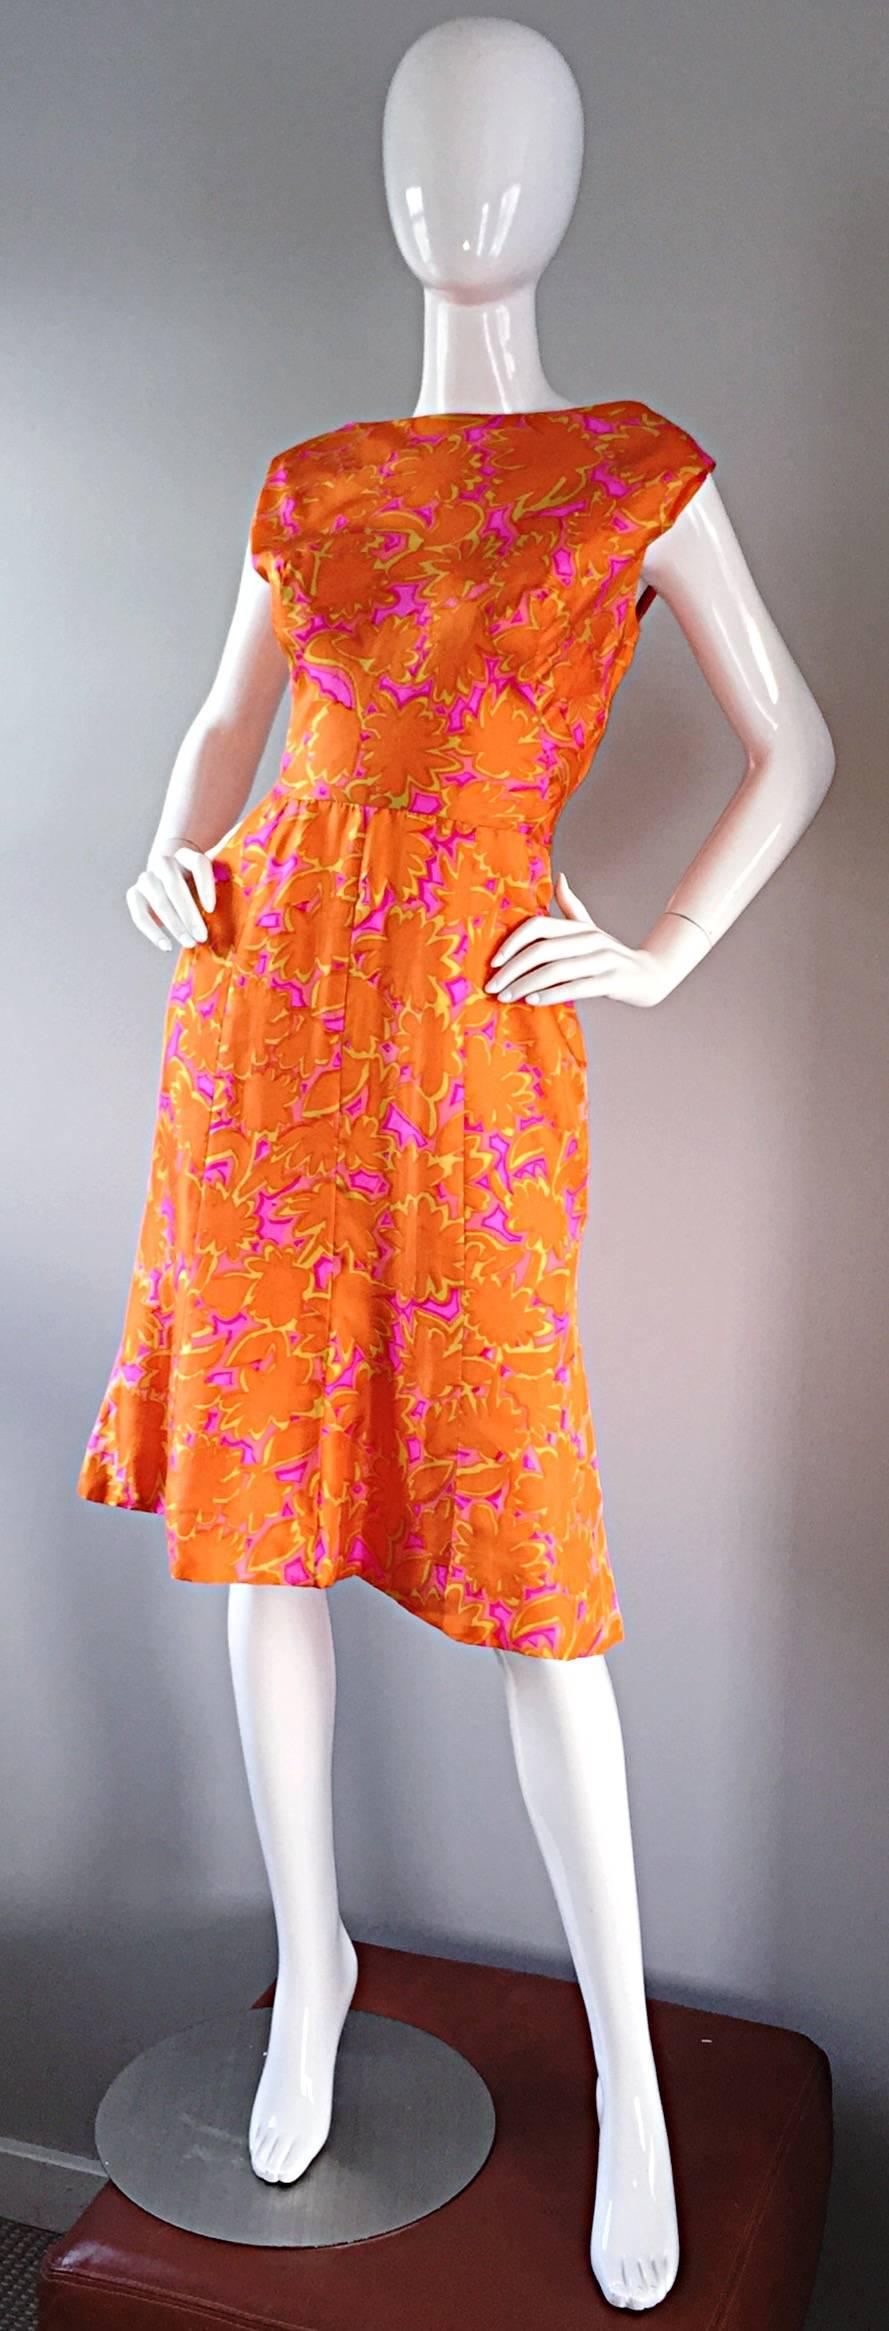 Beautiful 1960s silk dress, in bright orange, hot pink, and yellow! Chic floral psychedelic print, with an amazing, flattering silhouette! High neck, with an amazing draped back. Metal zipper up the side. Fully lined in silk. Extremely well made.